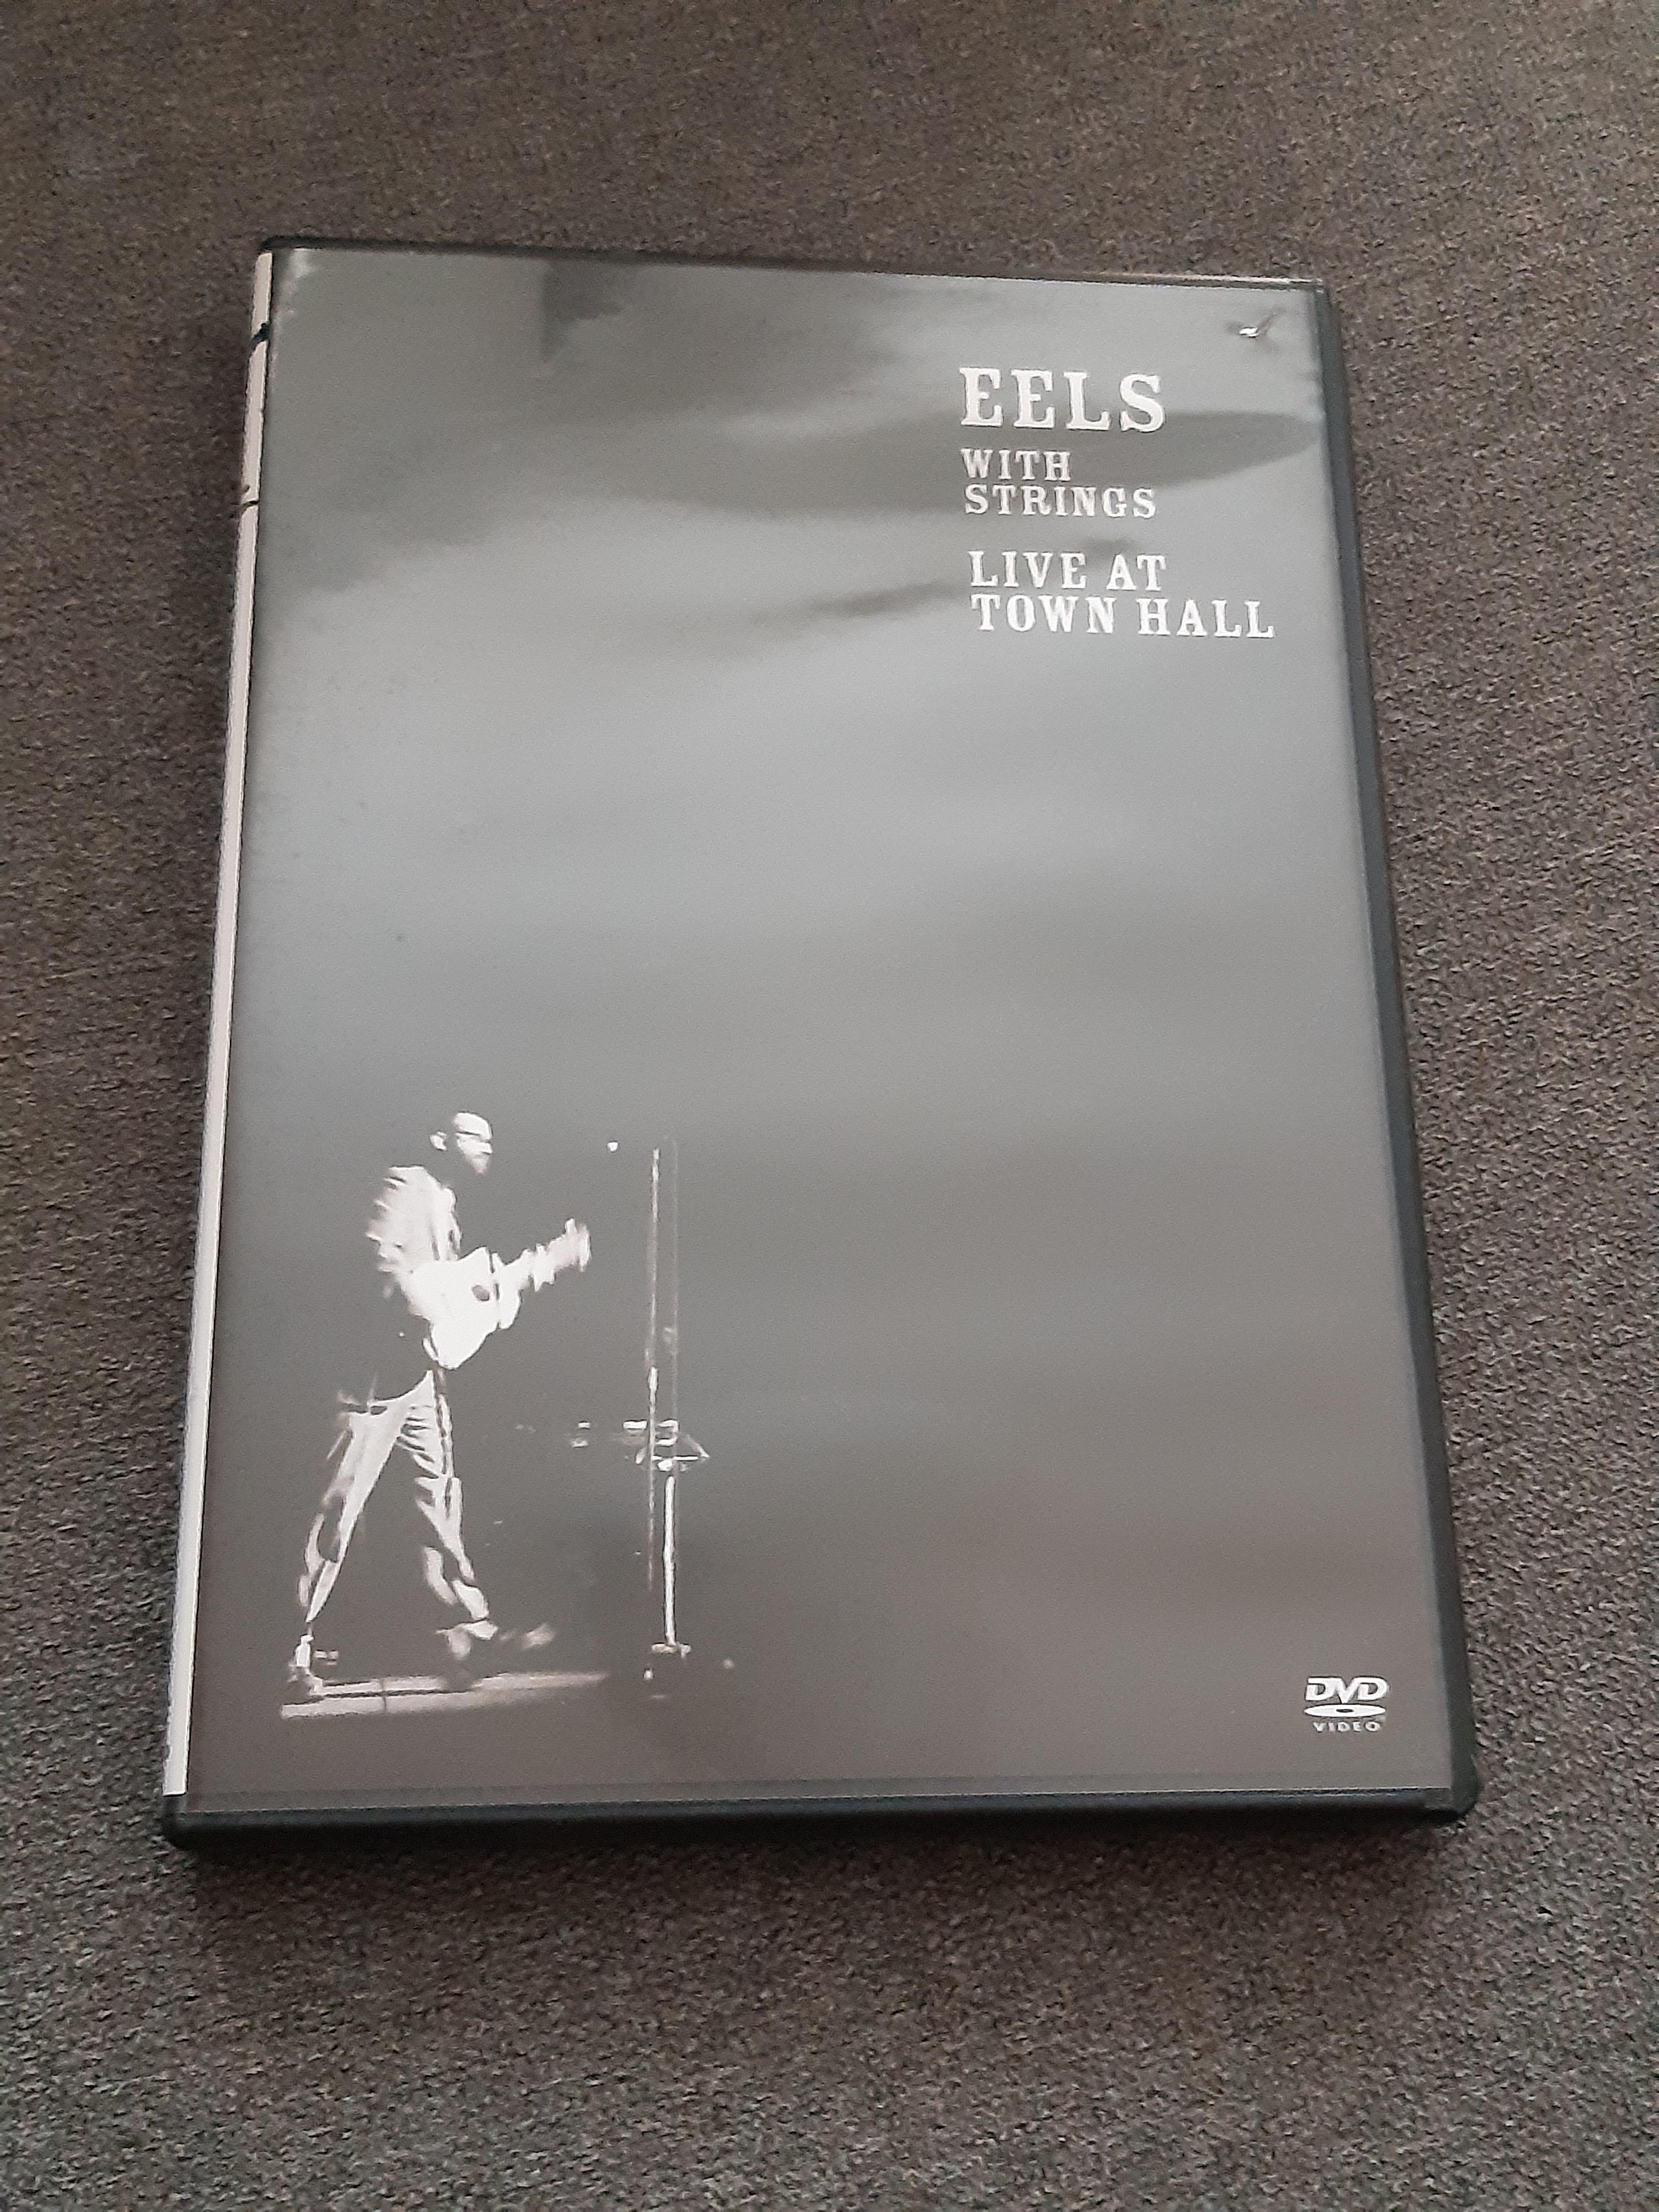 Eels - Eels with Strings, Live At Town Hall - DVD (käytetty)